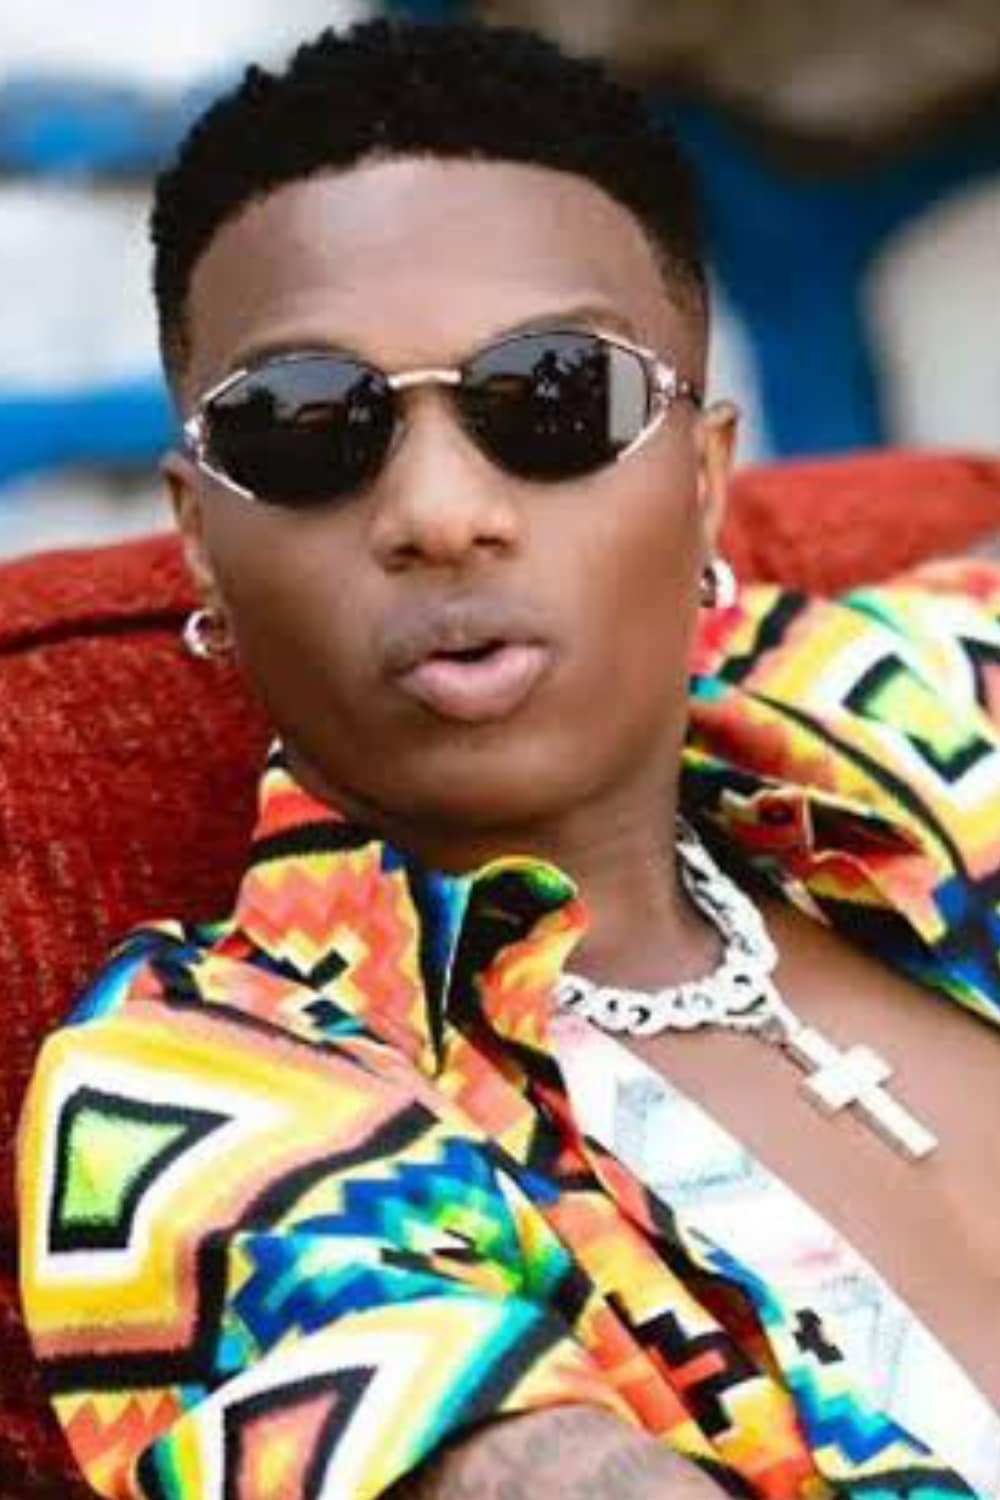 "Give am $5K now, na sunglasses he go use am buy - Reactions as Wizkid brags in old video that with $5K he's never going broke again